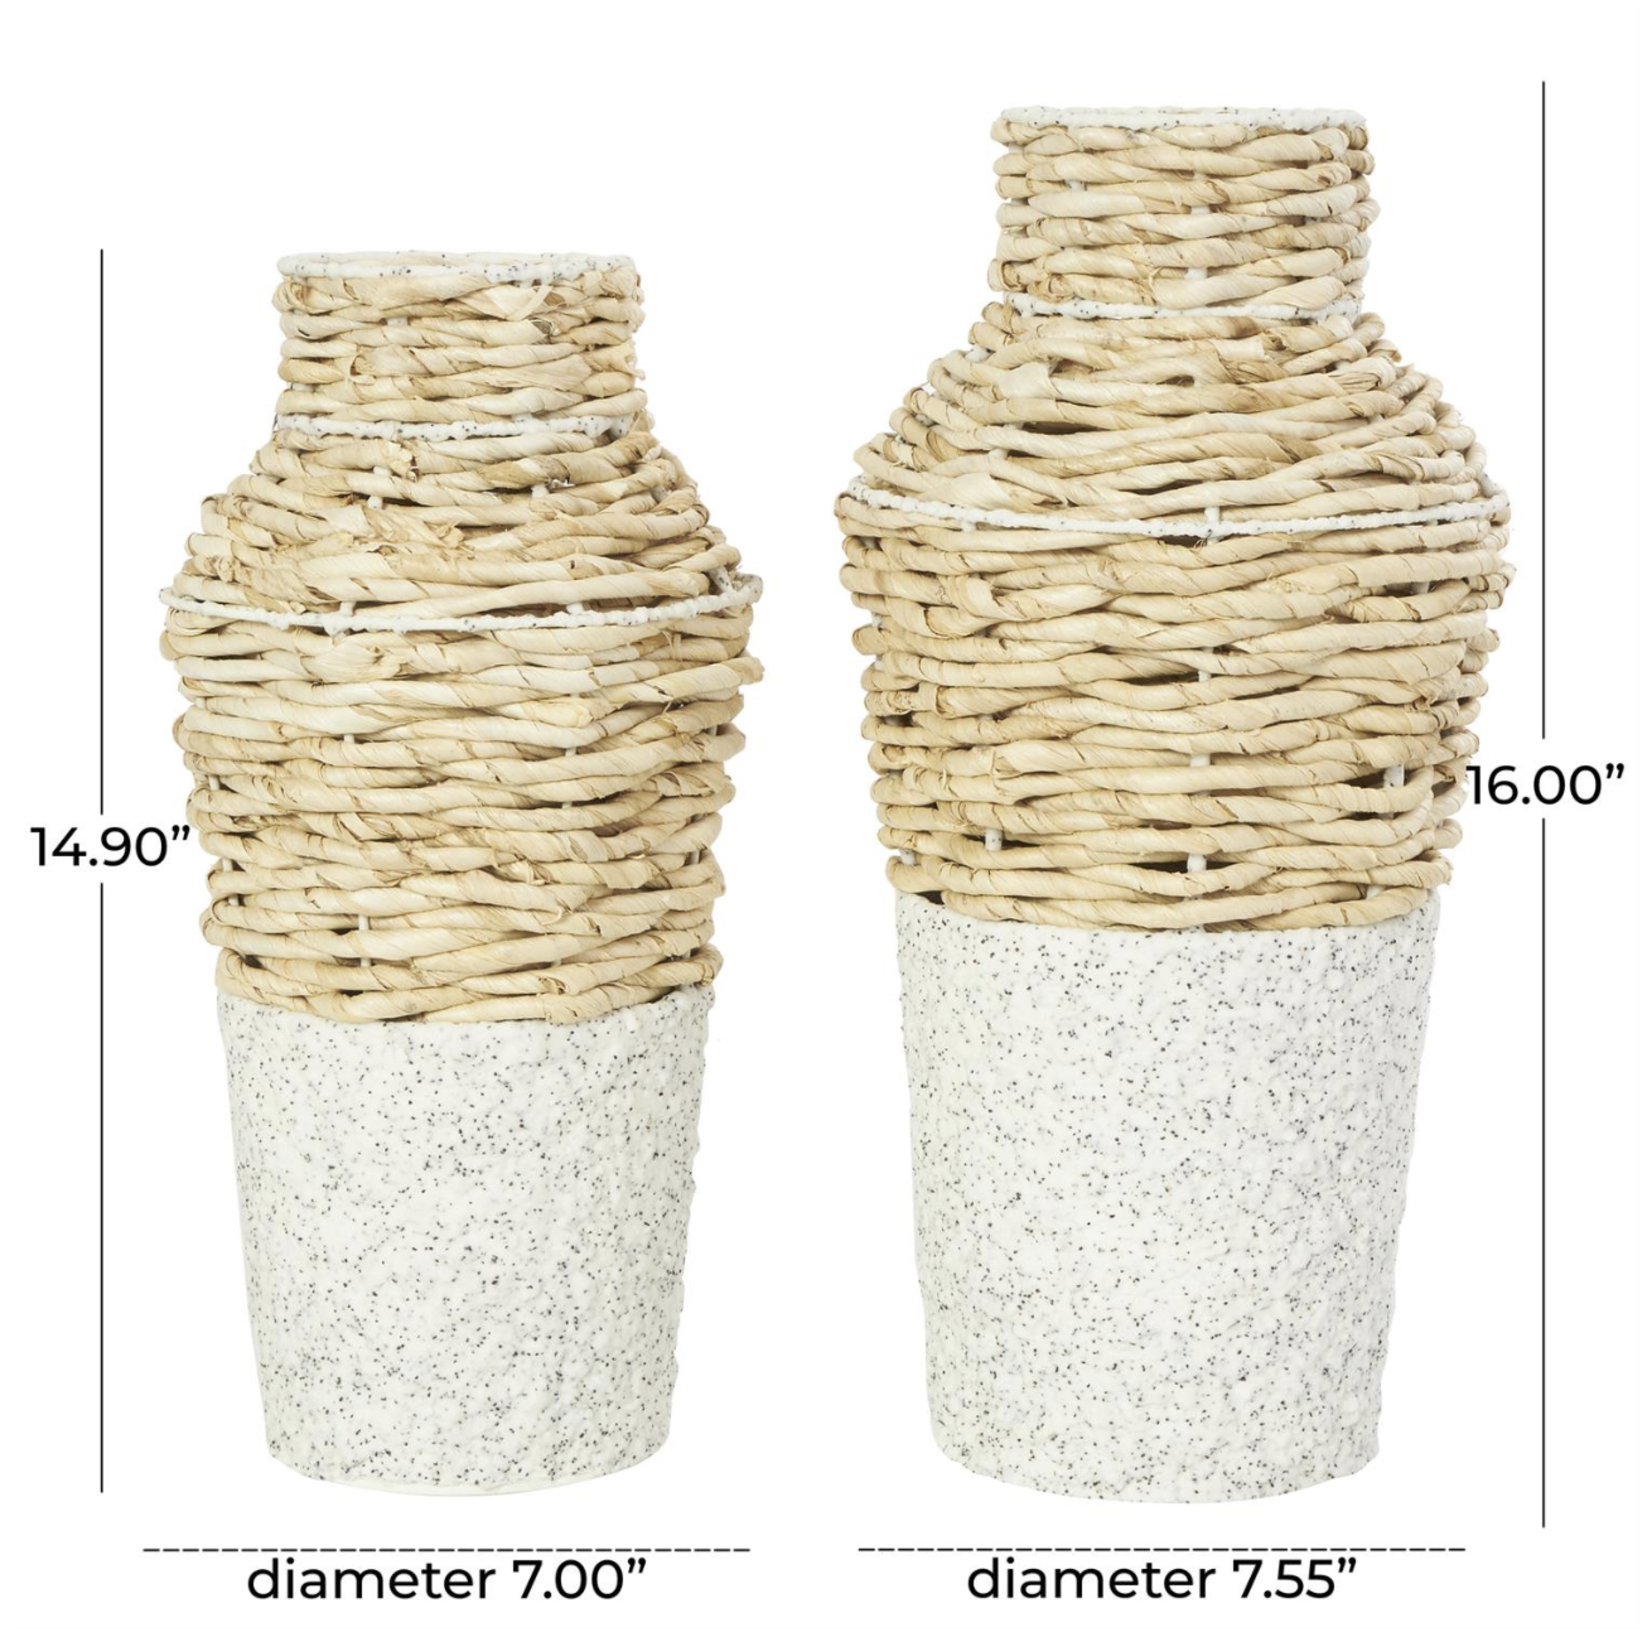 15”H X 7” SMALL BROWN SEAGRASS WOVEN VASE WITH SPECKLED BLACK AND WHITE BASES (NOT WATER TIGHT)